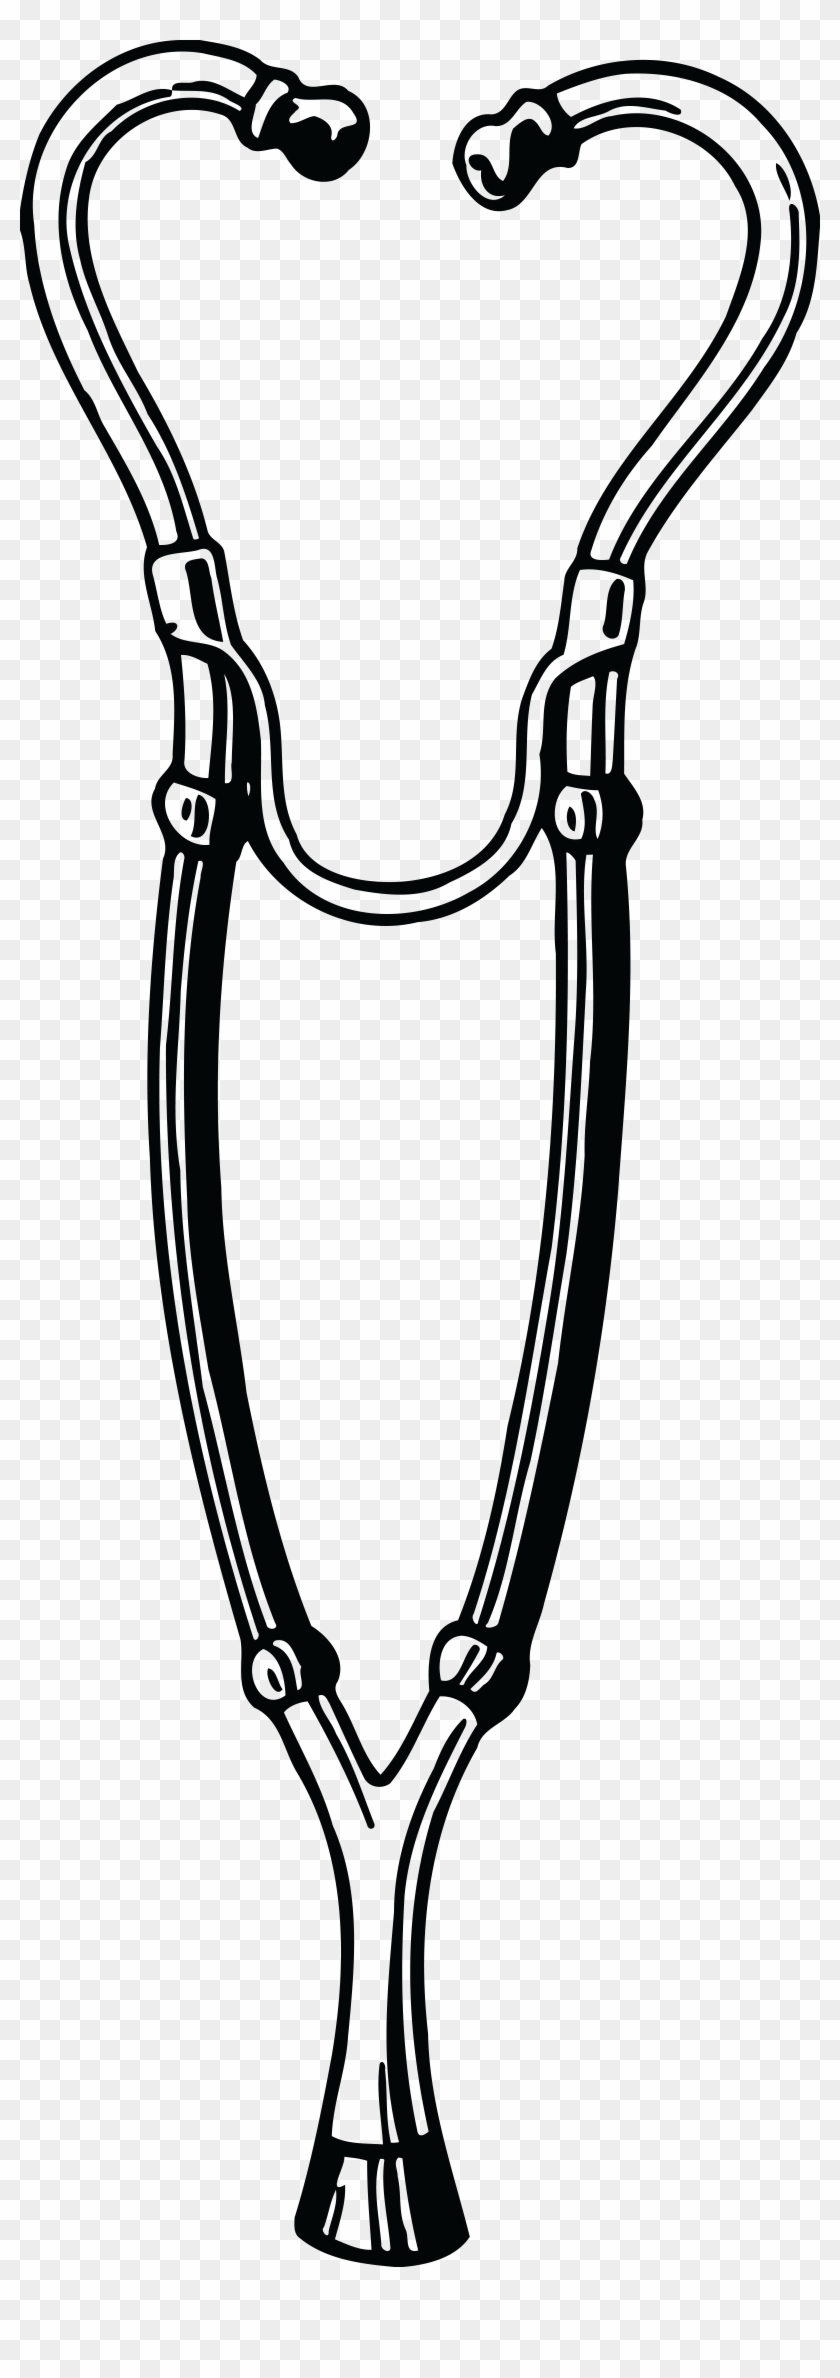 Free Clipart Of A Stethoscope - Stethoscope Png Drawing #192311